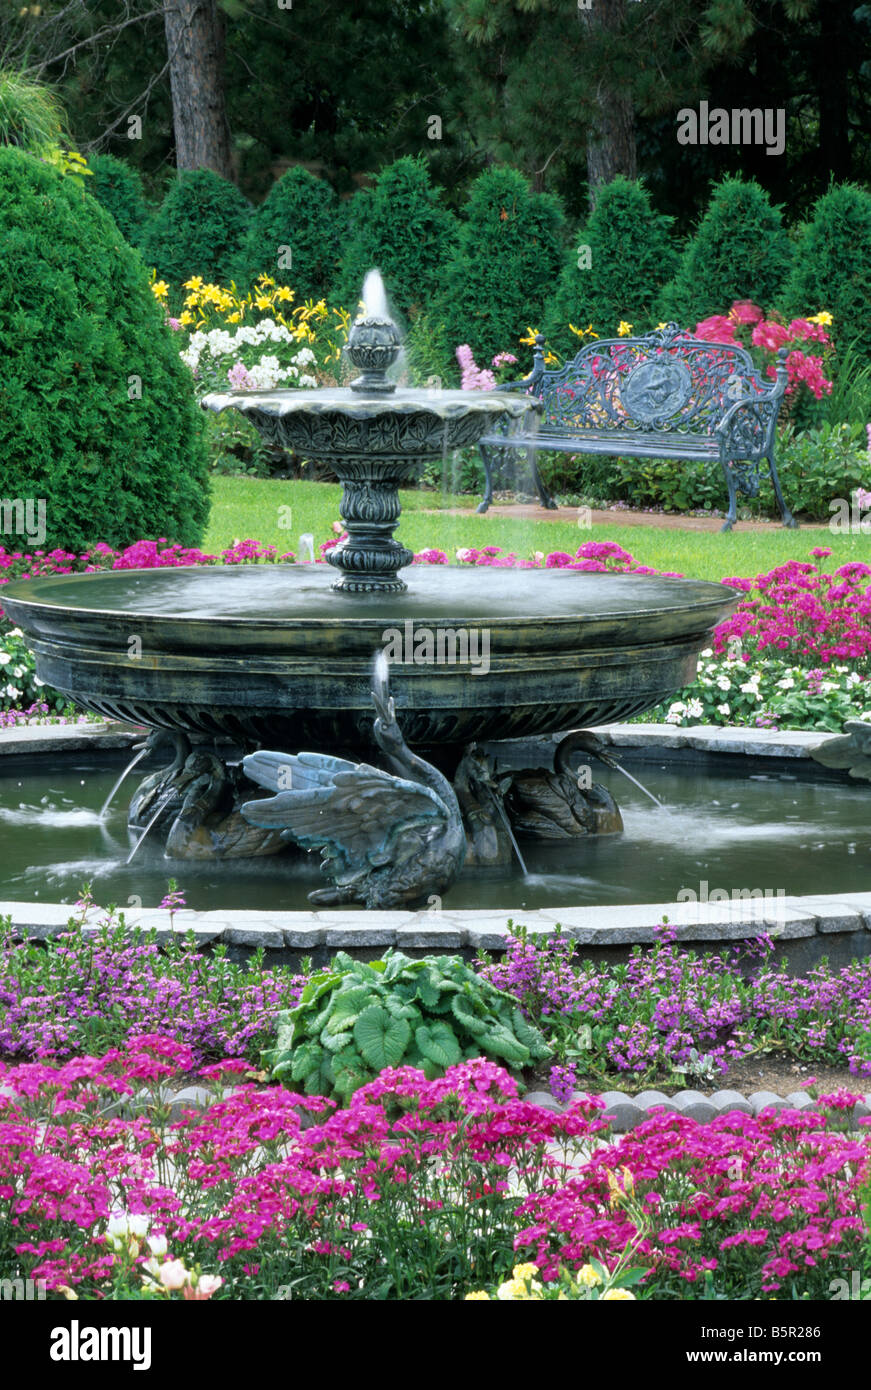 WINDSOR COURT FOUNTAIN IN THE FORMAL GARDENS AREA OF CLEMENS GARDENS, ST. CLOUD, MINNESOTA.  SUMMER. Stock Photo